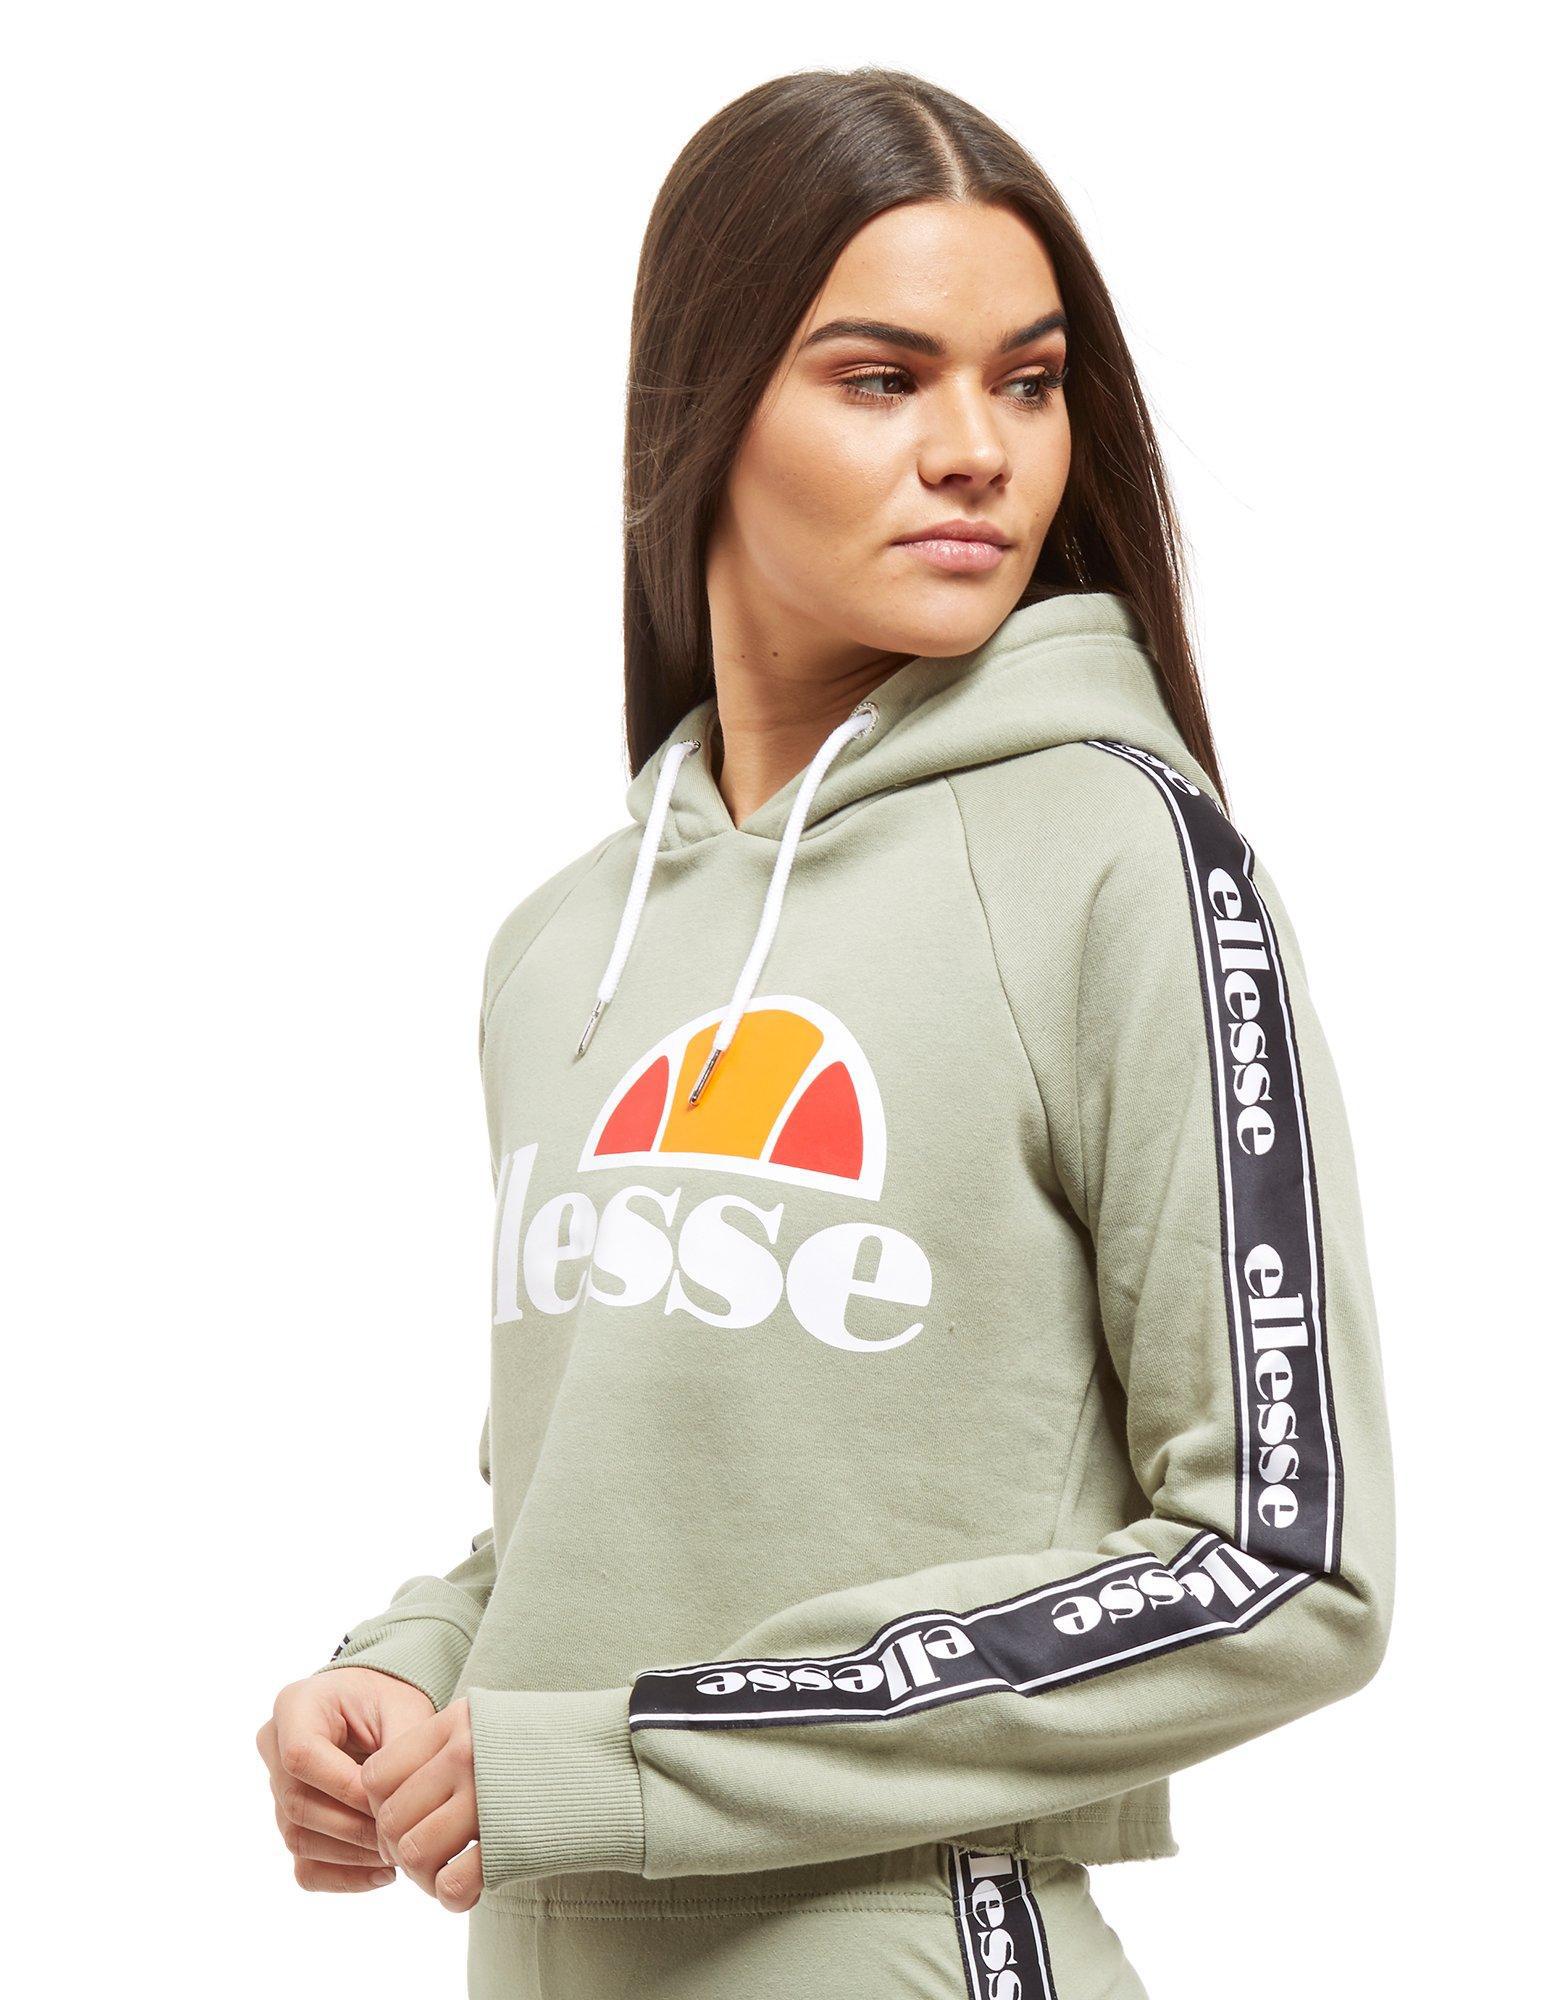 HOODIE WITH PRINTED LOGO AND TAPE ON SLEEVES Woman Cream | islamiyyat.com